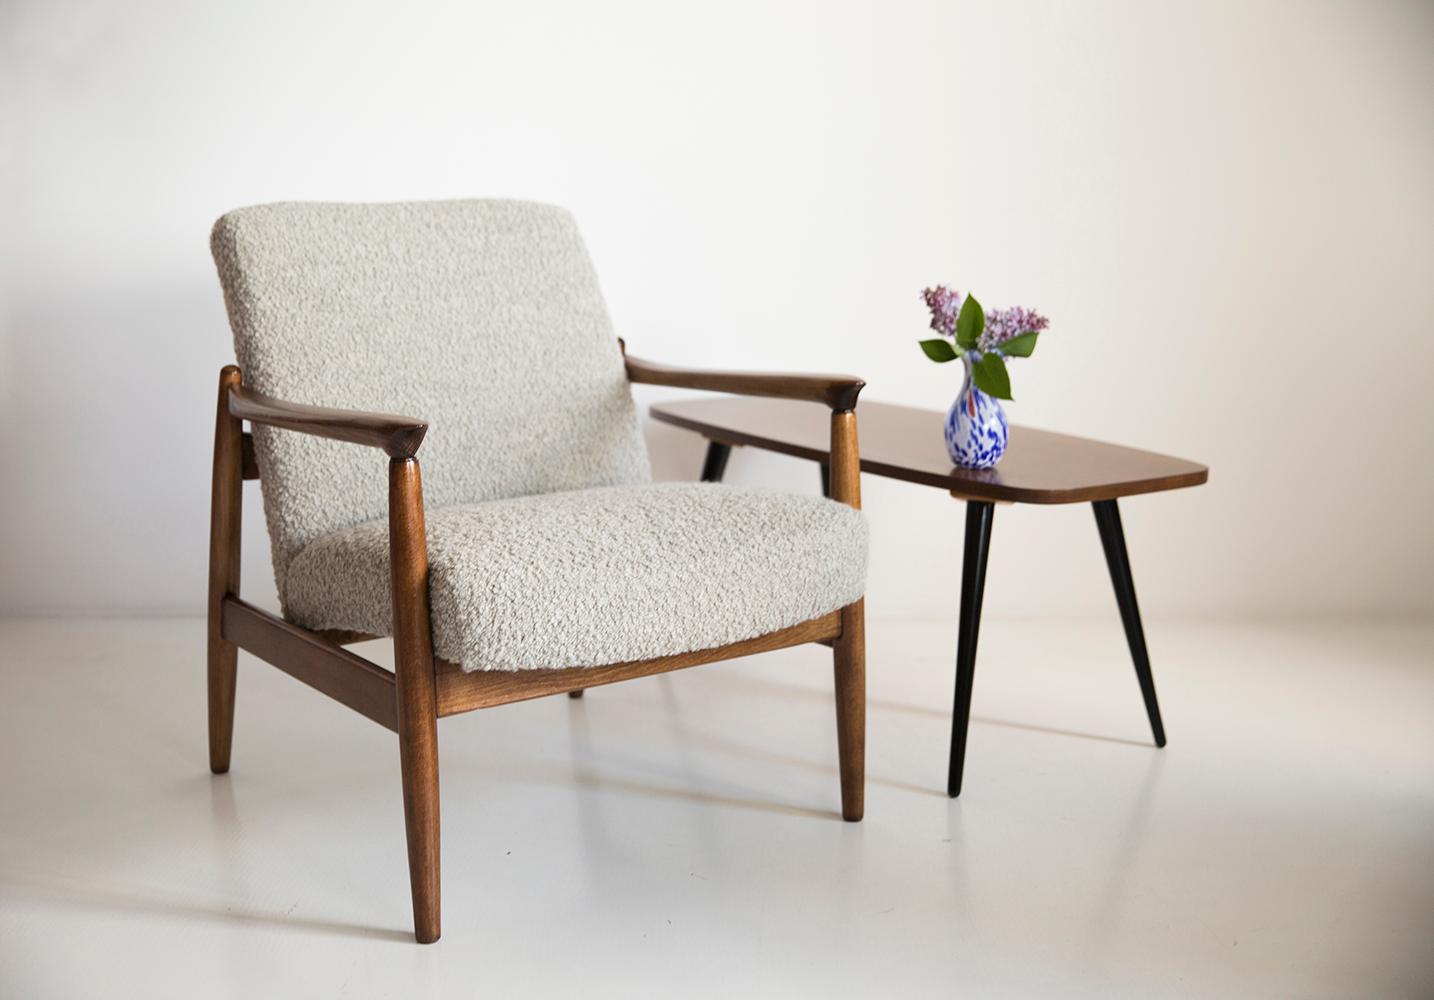 Unique alpaca wool armchair, designed by Edmund Homa. The armchair was made in the 1960s in the Gosciecinska Furniture Factory from solid beechwood. The GFM type armchair is regarded one of the best Polish armchair design from the previous age. The